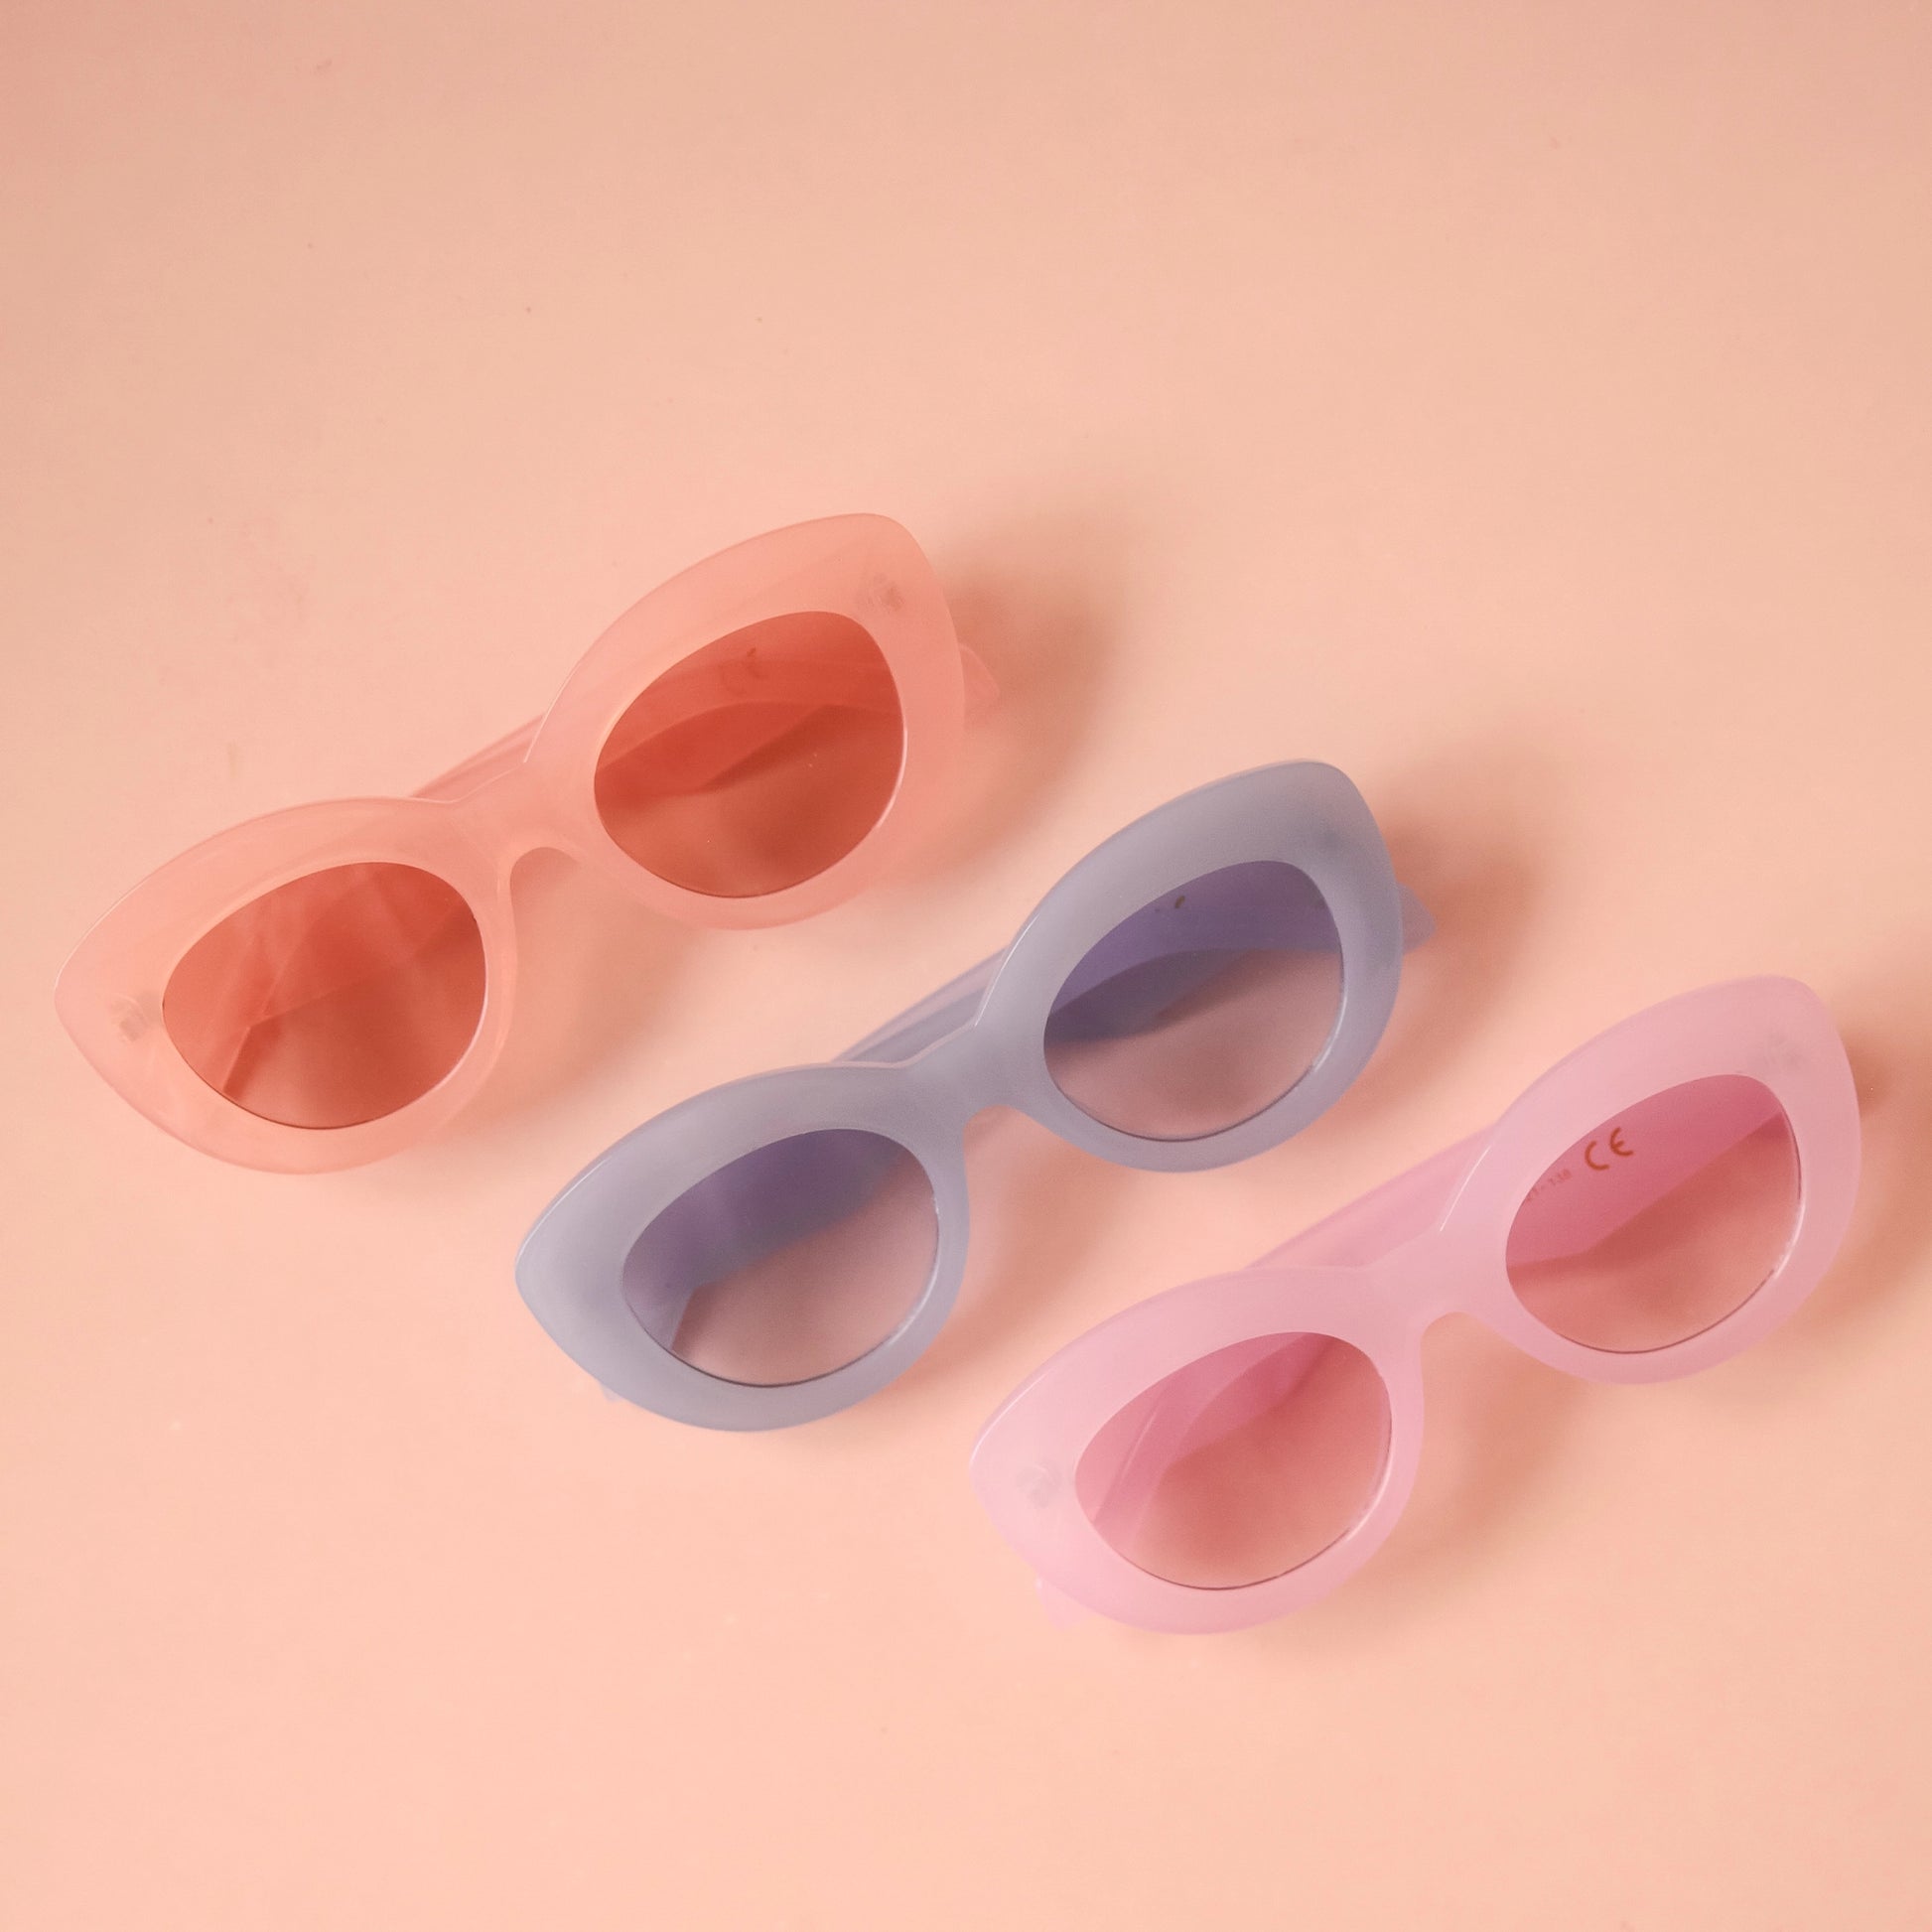 On a peachy background is a group photo of three different color options for the the Gemma Sunglass frame shape.